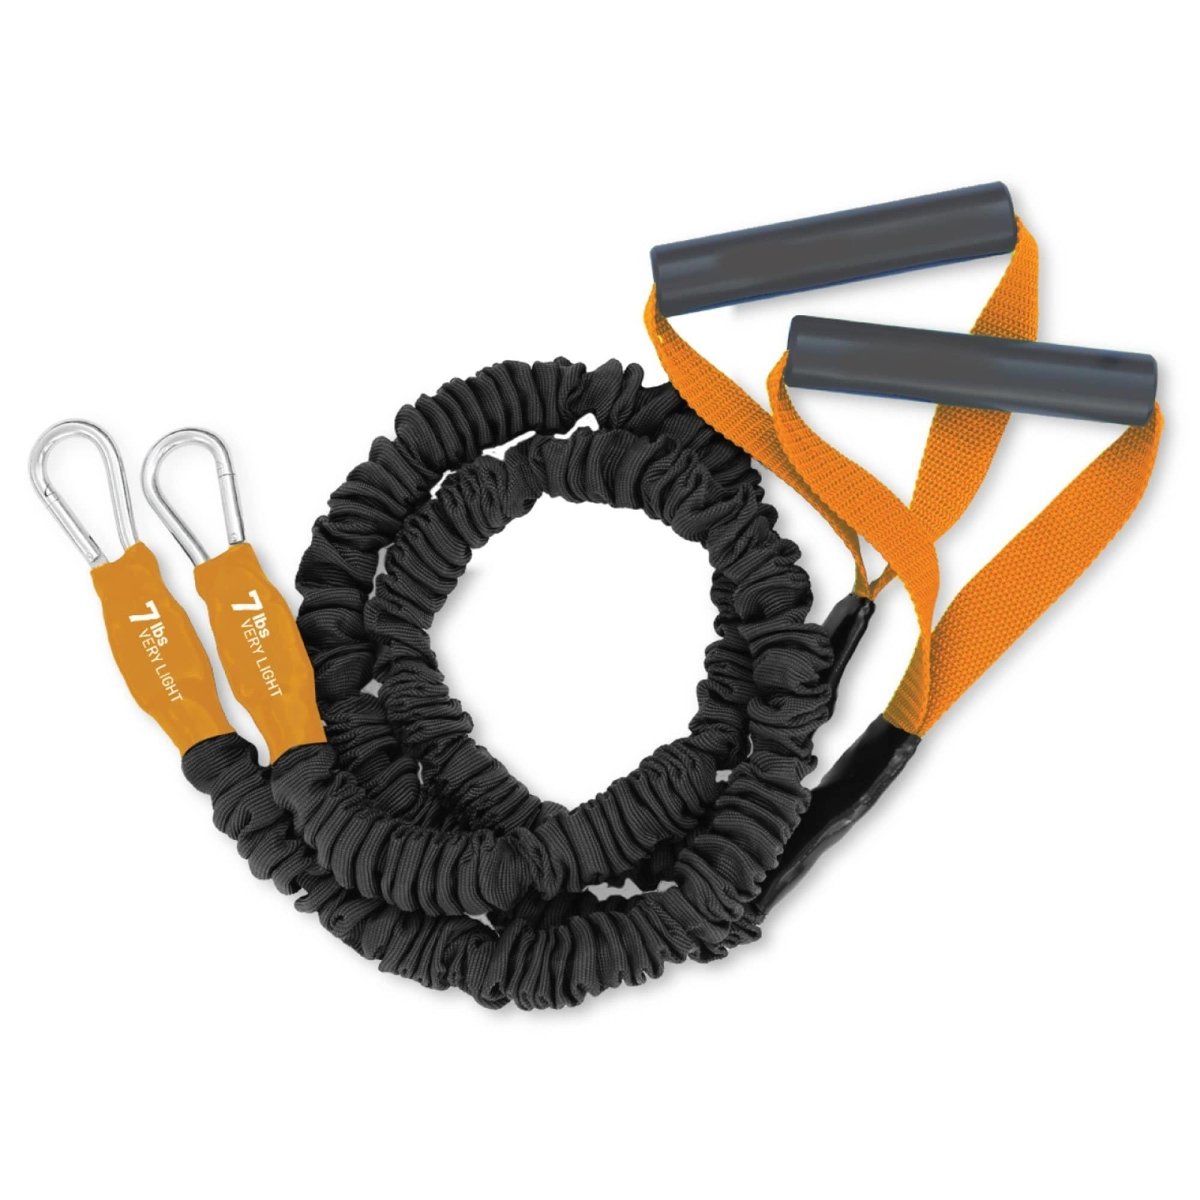 X-Over Arm and Shoulder Rehab Bundle Level 2 best resistance bands made in USA and covered for safety - FitCord Resistance Bands